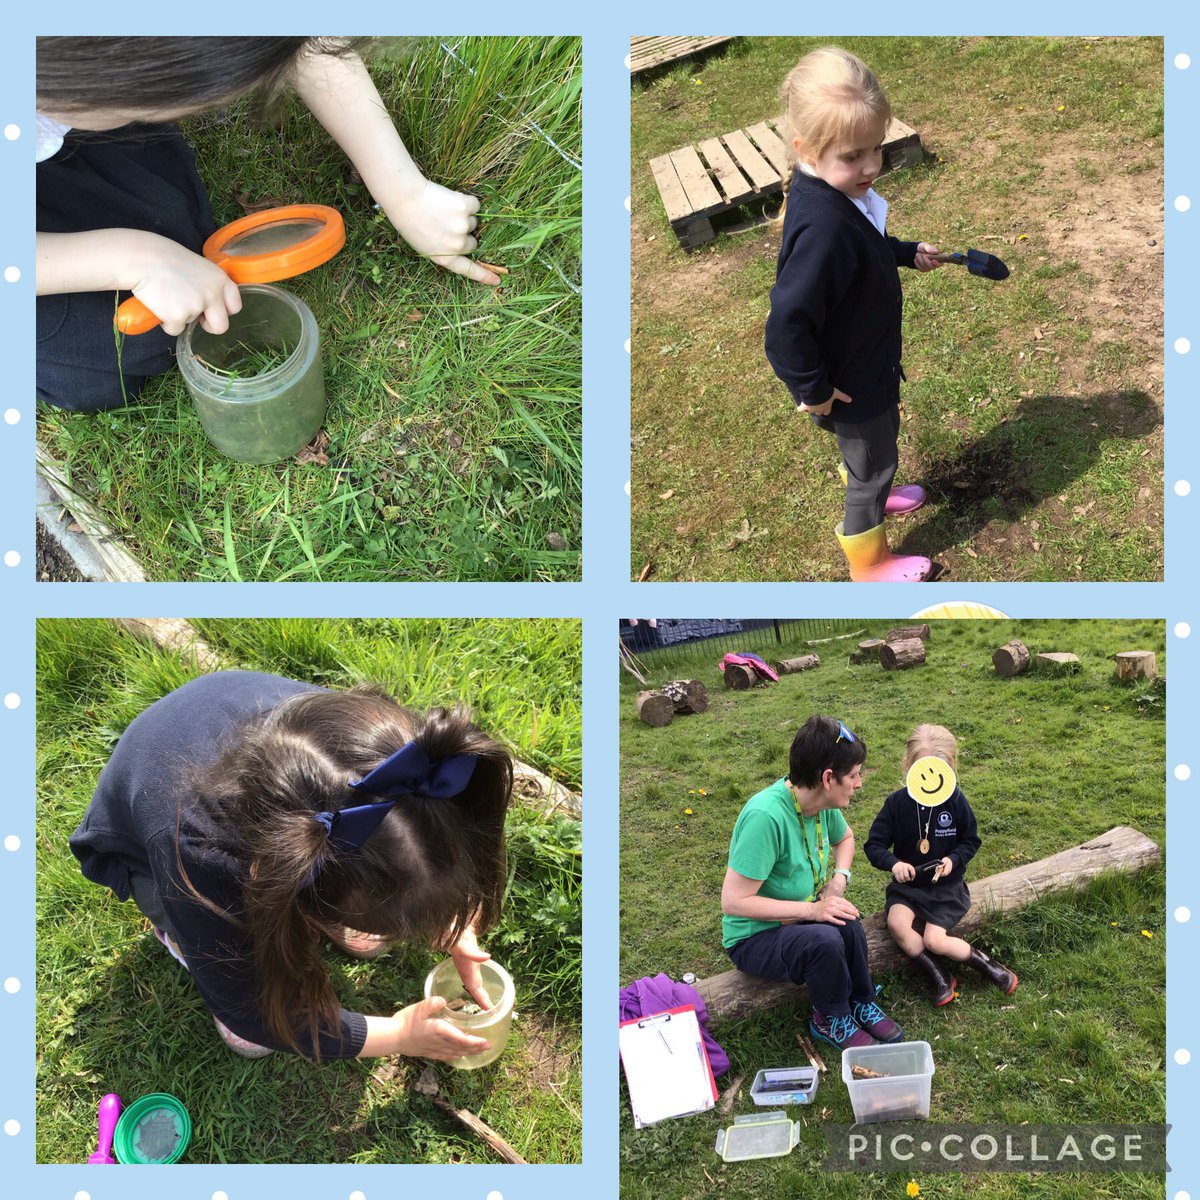 Hedgehog Class are having a glorious afternoon bug hunting and whittling in the sunshine, Spring has finally sprung here @PoppyfieldSch ☀️🪲🕷 #forestschool #bughunt #sunshine

@MrsPBooth @PoppyfieldHead